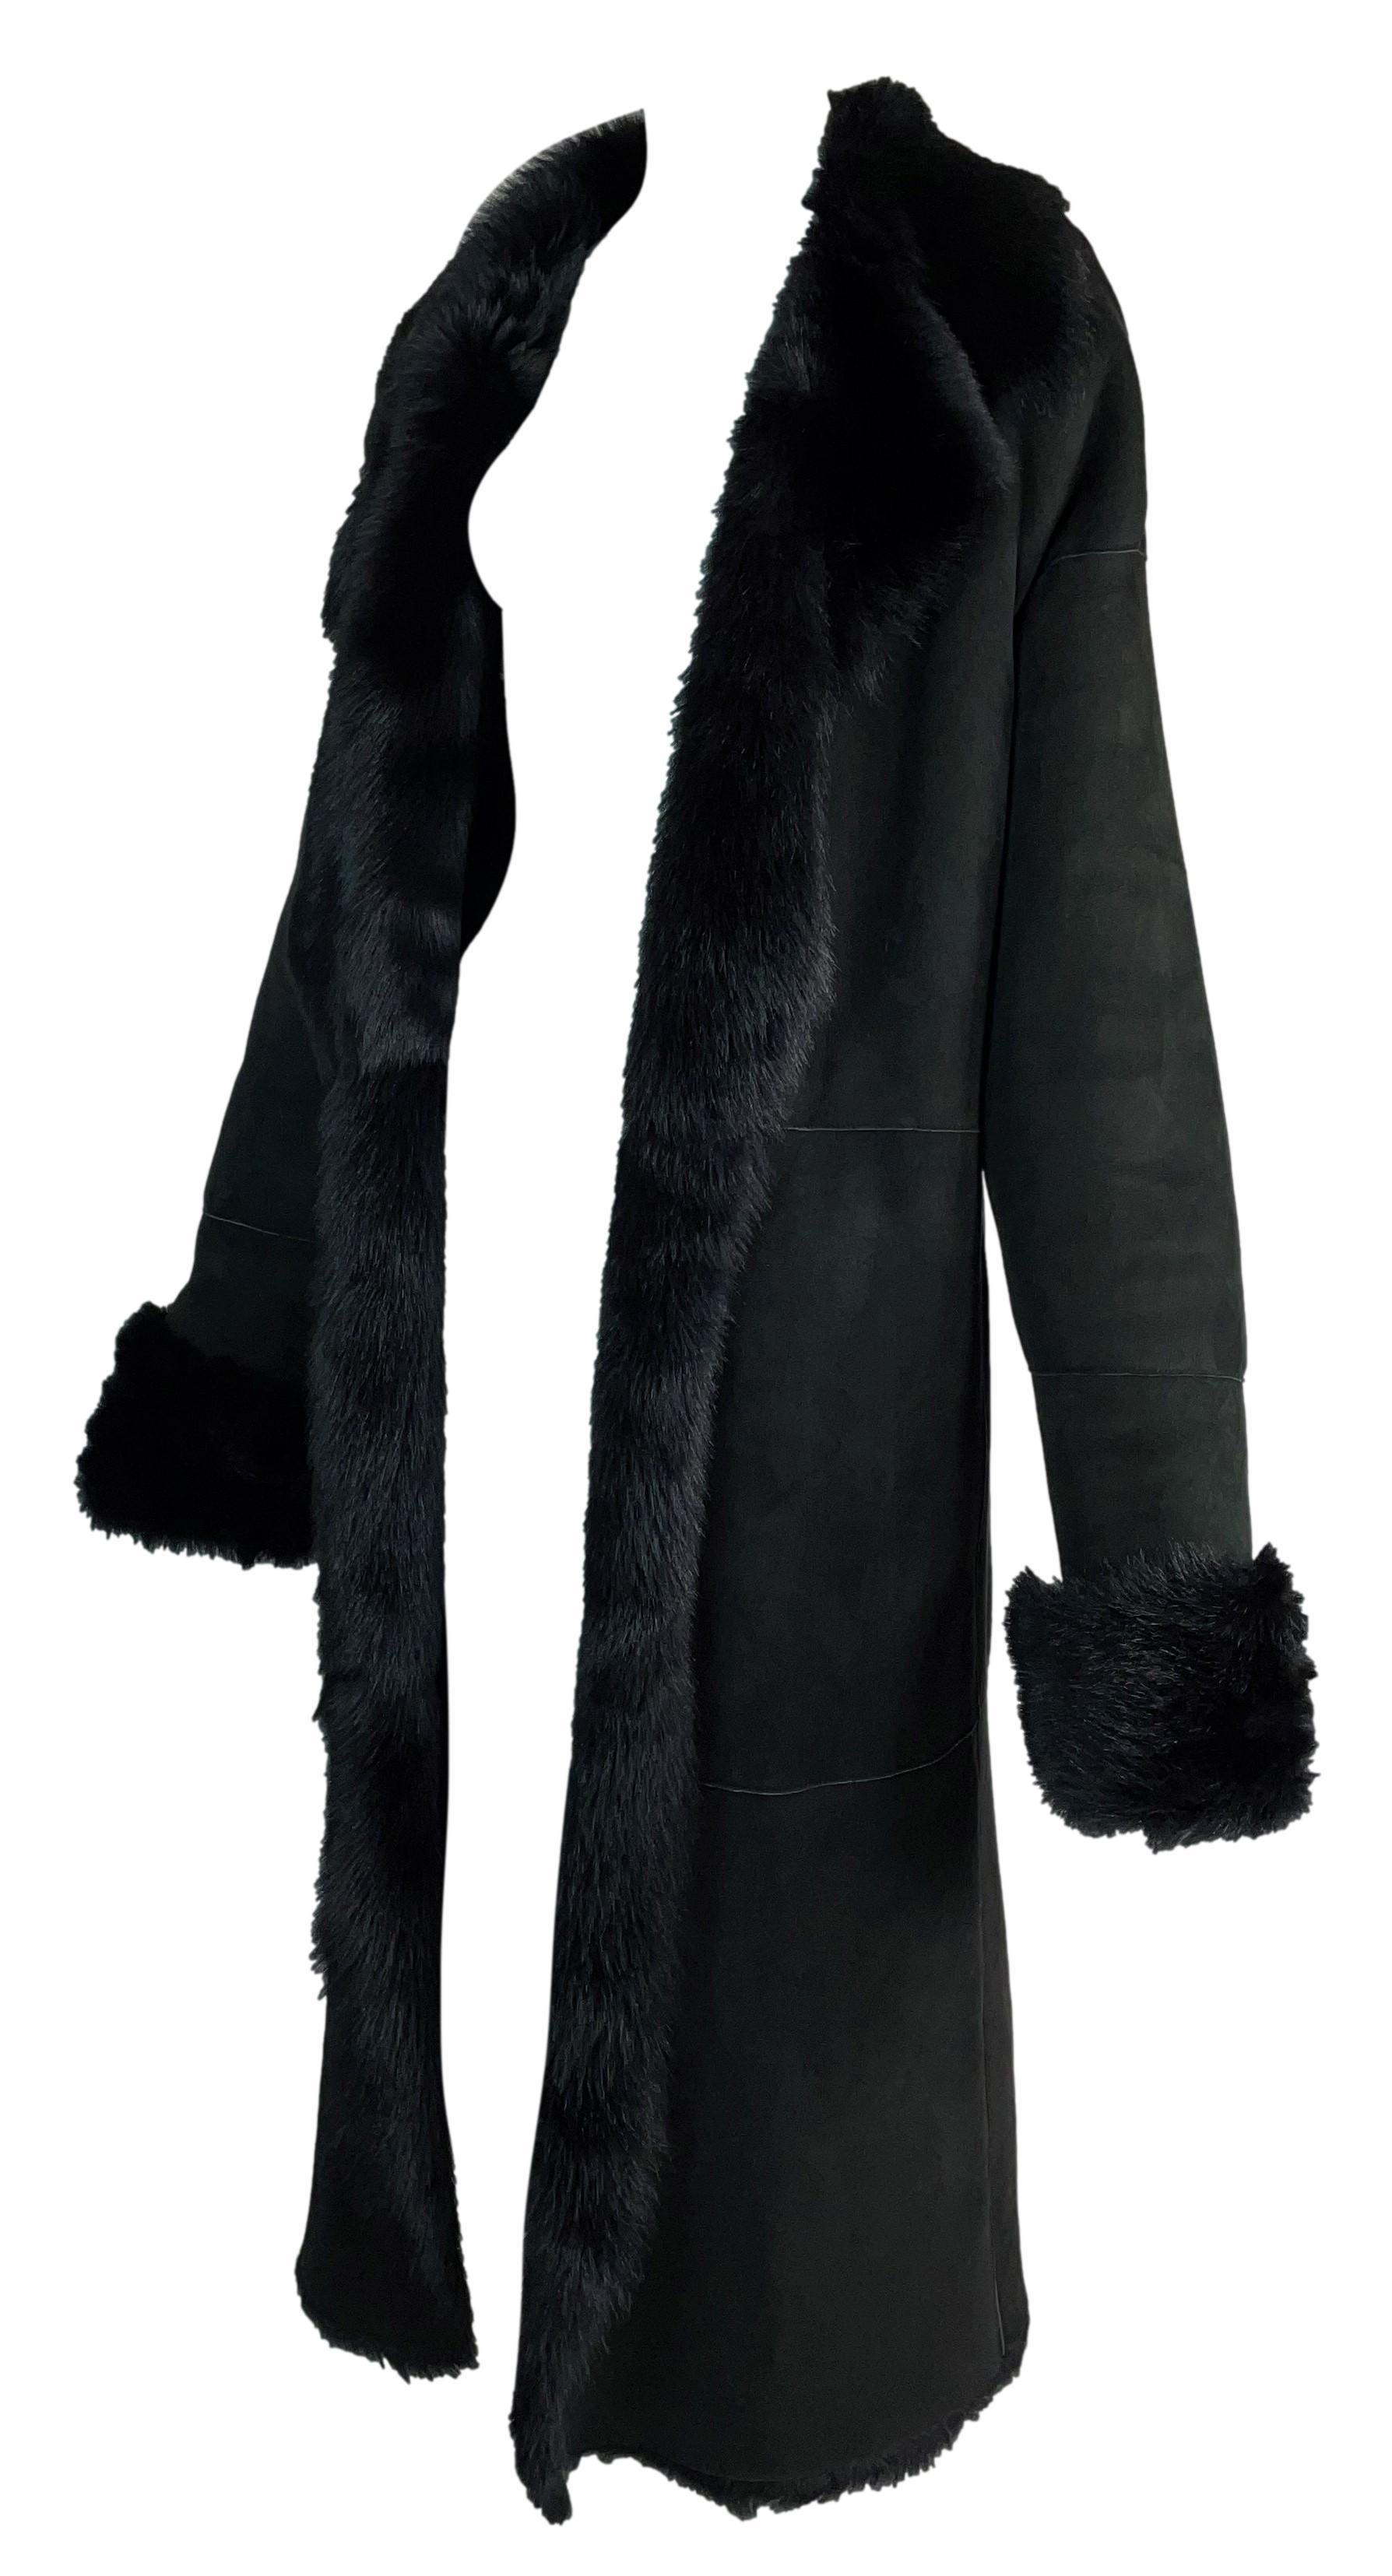 DESIGNER: 2000's Donna Karan- her high end black label- very heavy and warm coat!

Please contact us for more images and/or information.

CONDITION: Good- light wear, no holes or stains

FABRIC: Suede leather with genuine fur

COUNTRY: USA

SIZE: No